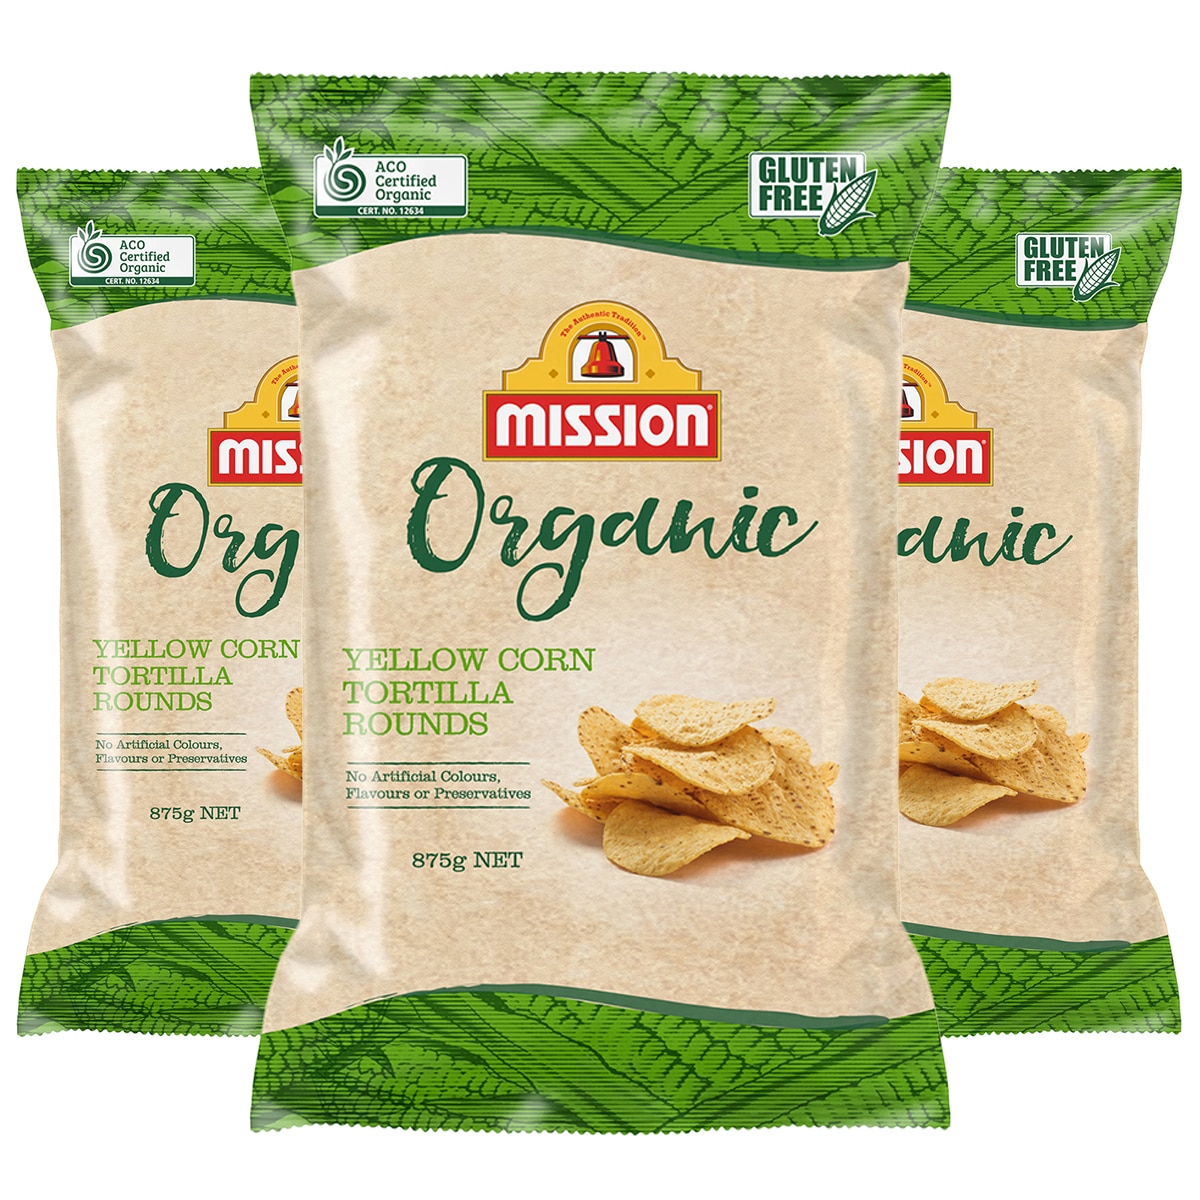 Mission Organic Tortilla Rounds 875g